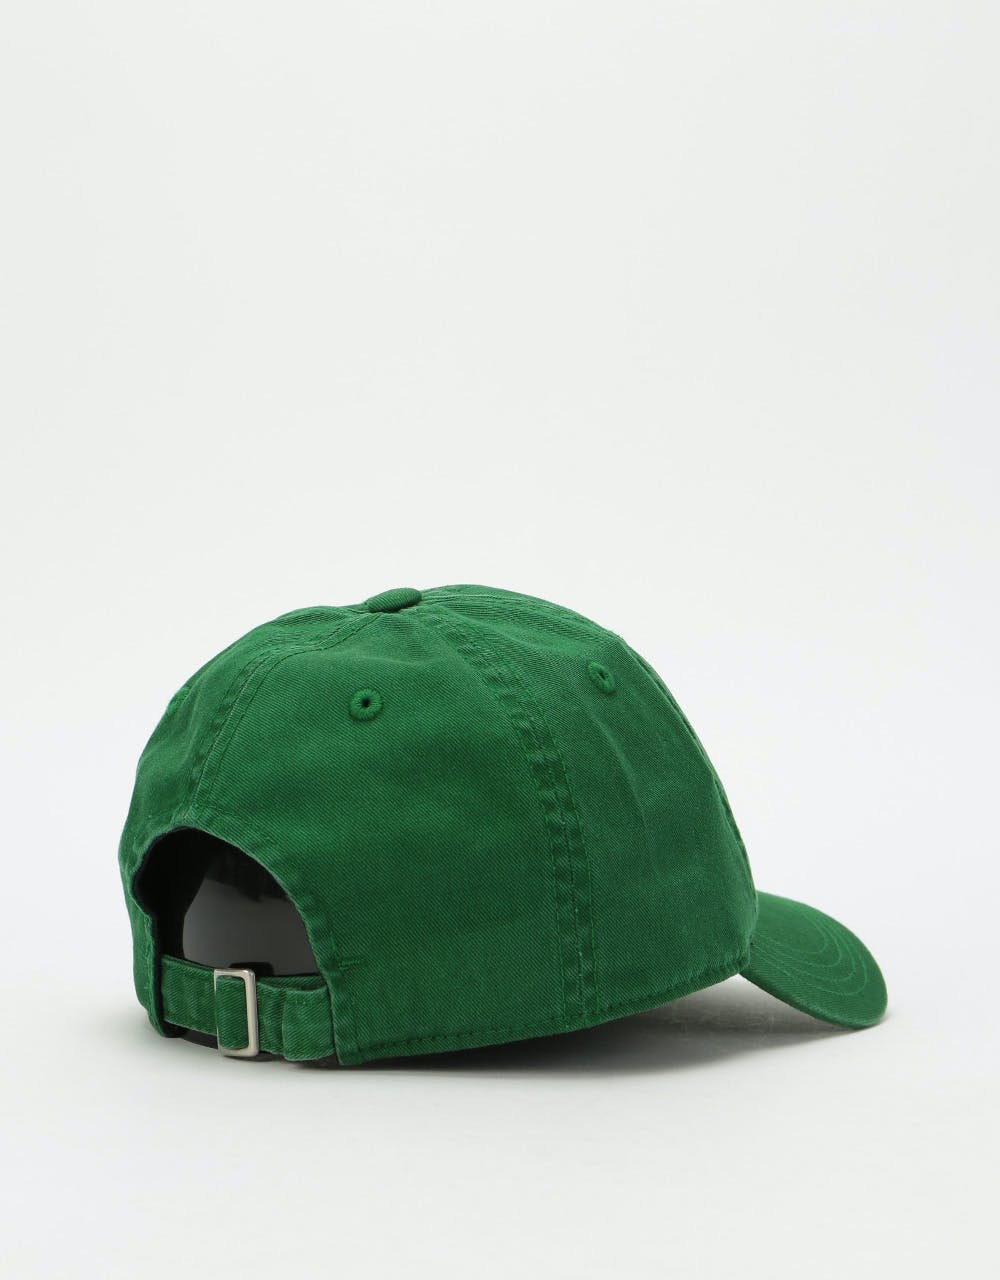 Route One Underline Cap - Forest Green